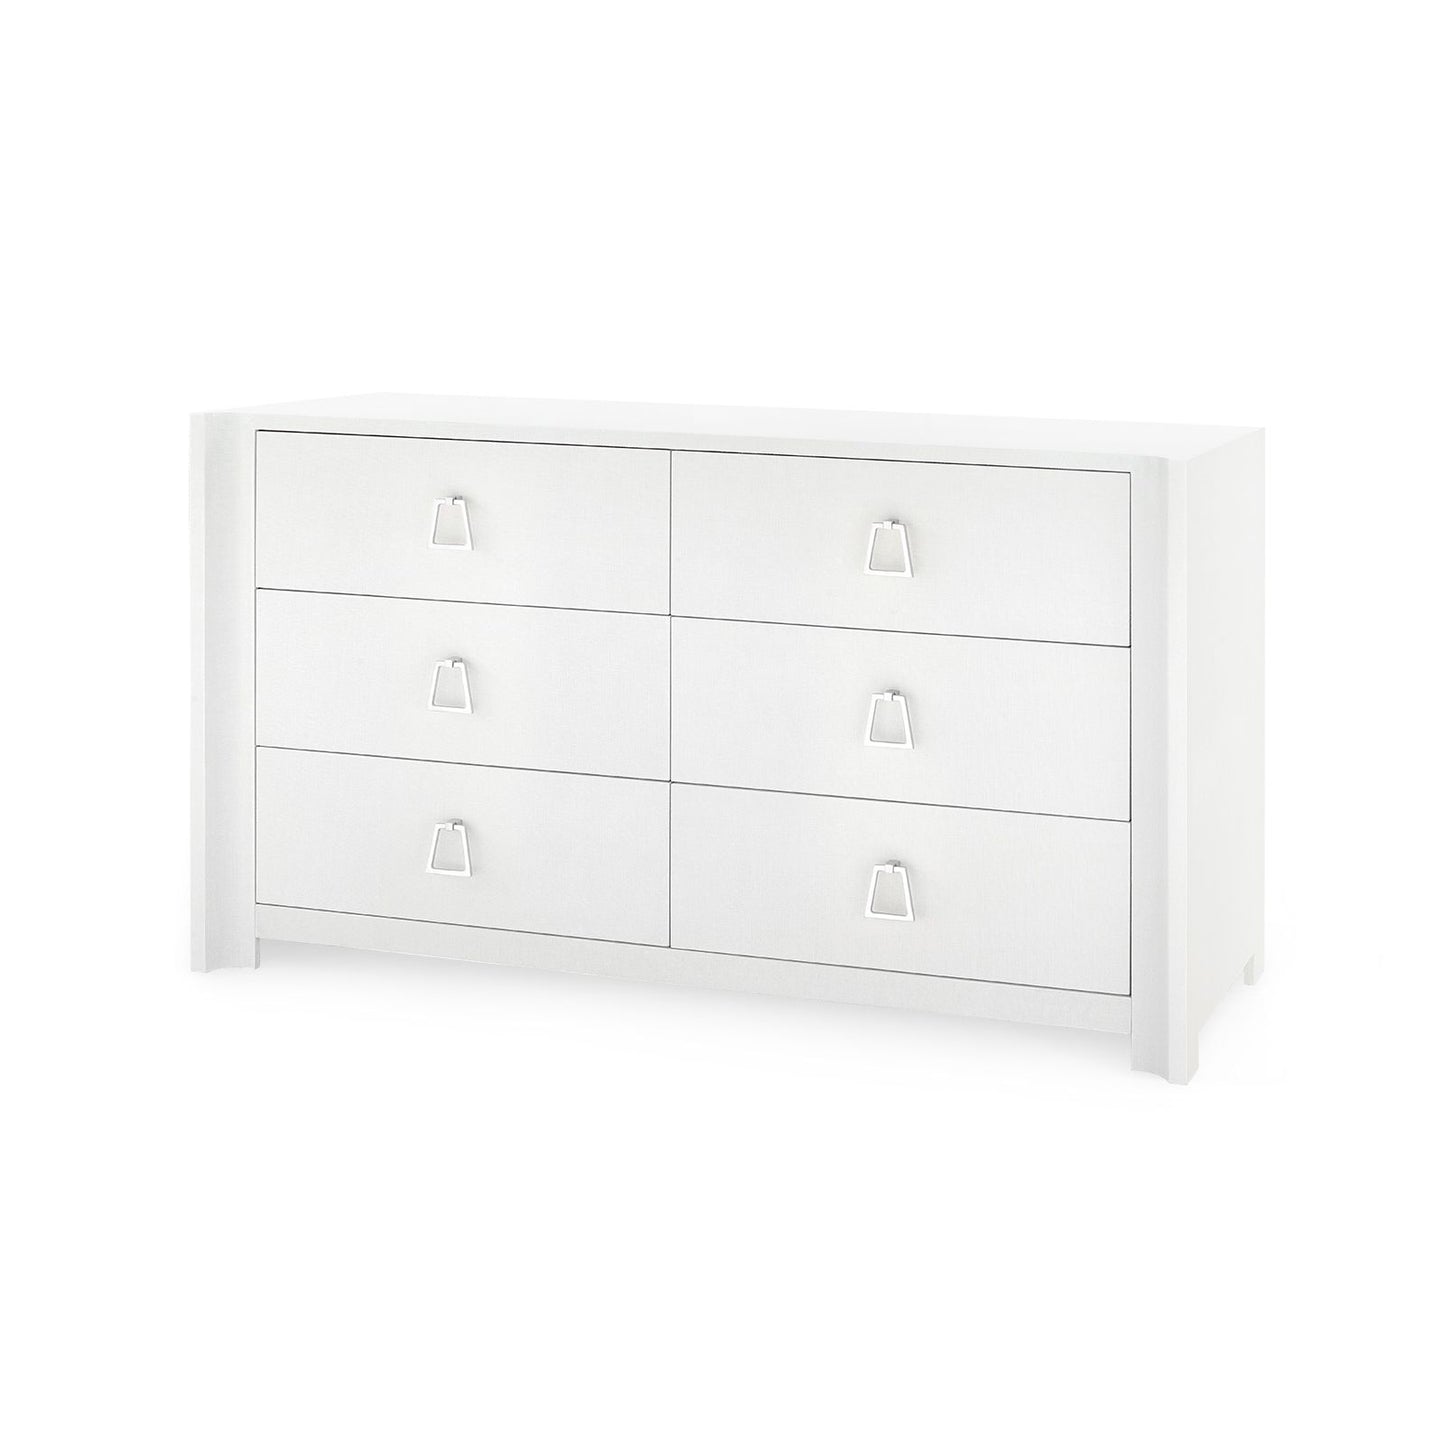 Load image into Gallery viewer, Audrey Extra Large 6-Drawer White / Kelley / Nickel Finish BrassDrawer Bungalow 5  White Kelley Nickel Finish Brass Four Hands, Burke Decor, Mid Century Modern Furniture, Old Bones Furniture Company, Old Bones Co, Modern Mid Century, Designer Furniture, https://www.oldbonesco.com/
